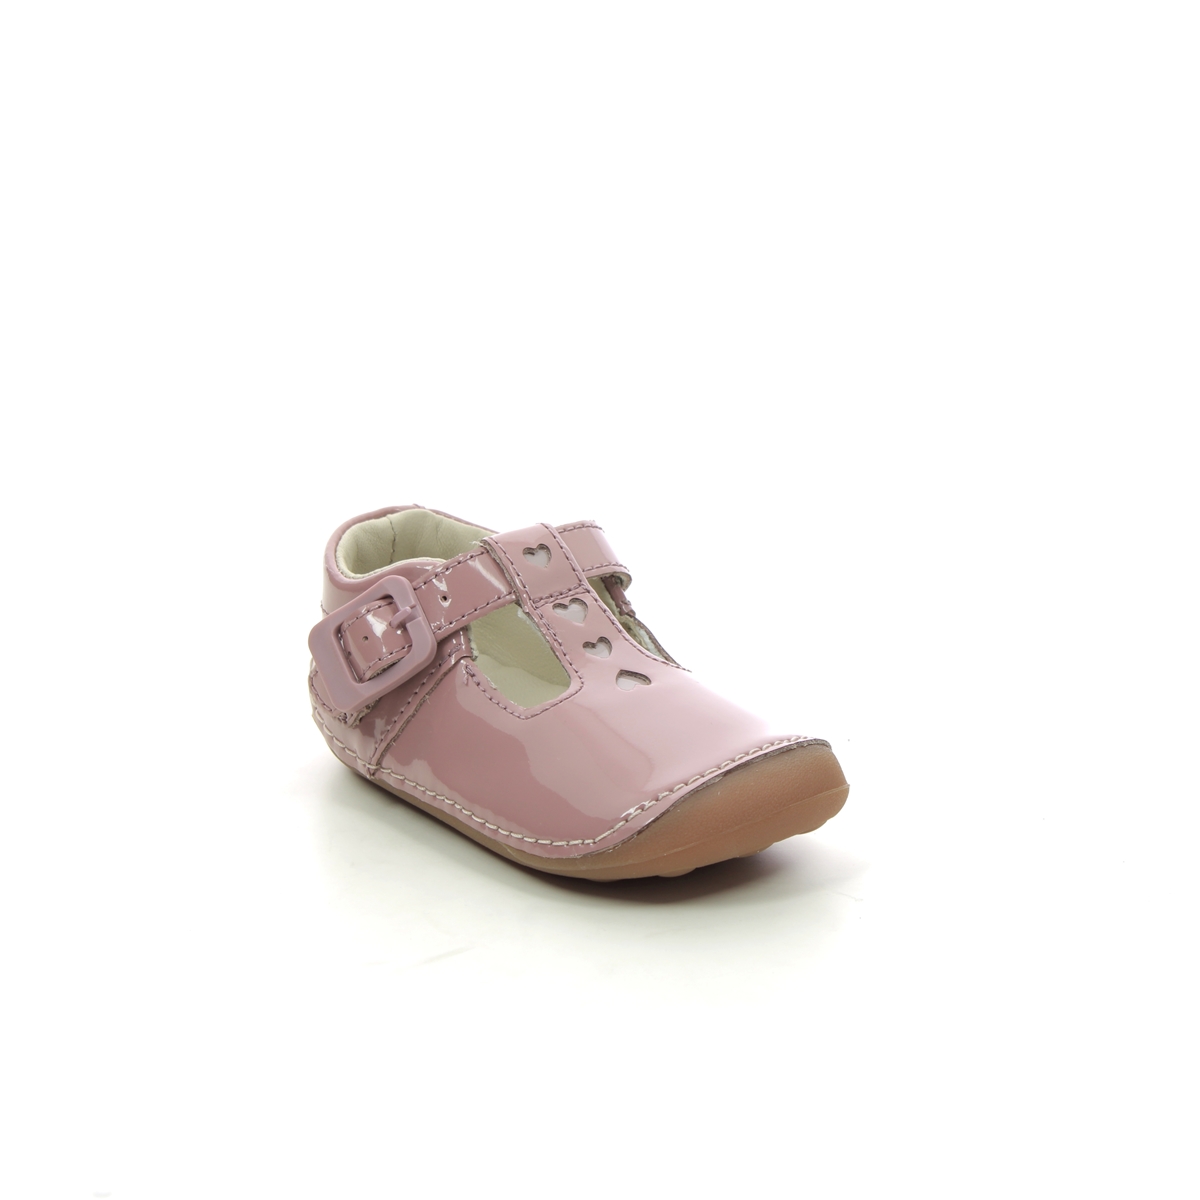 Clarks Tiny Beat T Pink Kids Girls First And Baby Shoes 694087G In Size 3.5 In Plain Pink G Width Fitting For kids